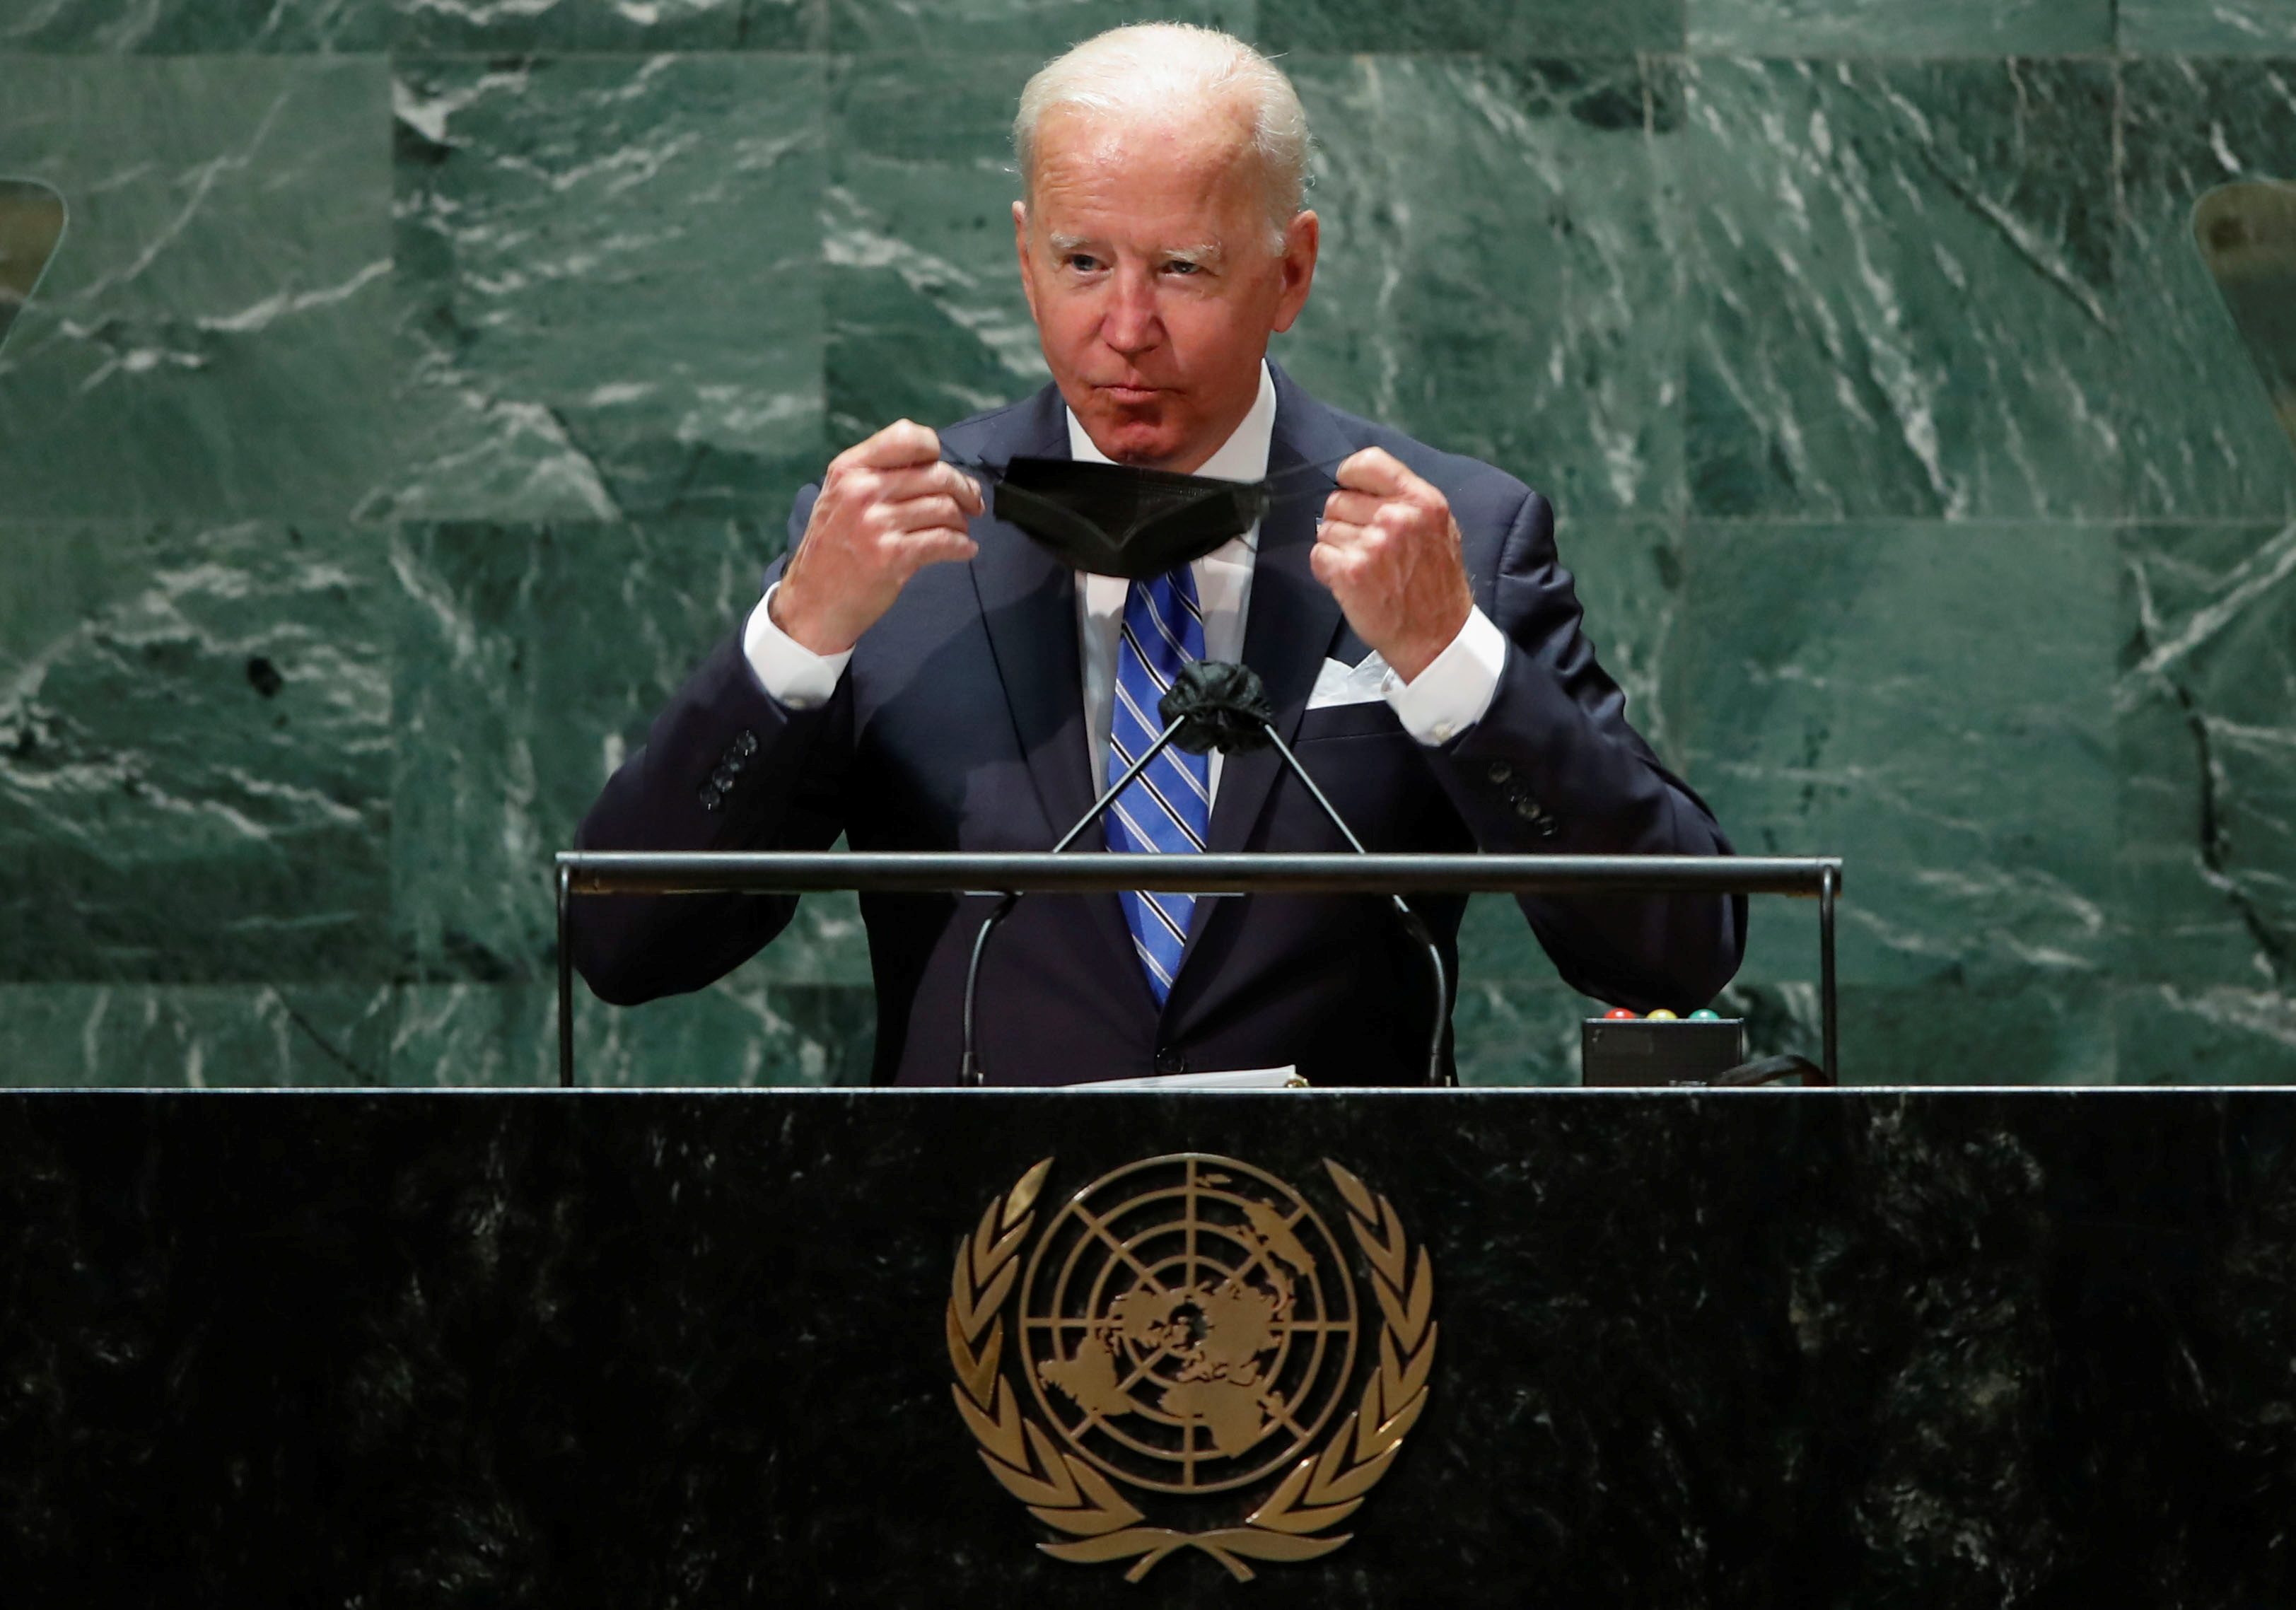 Biden pledges new vaccine donations in bid to rally global pandemic fight